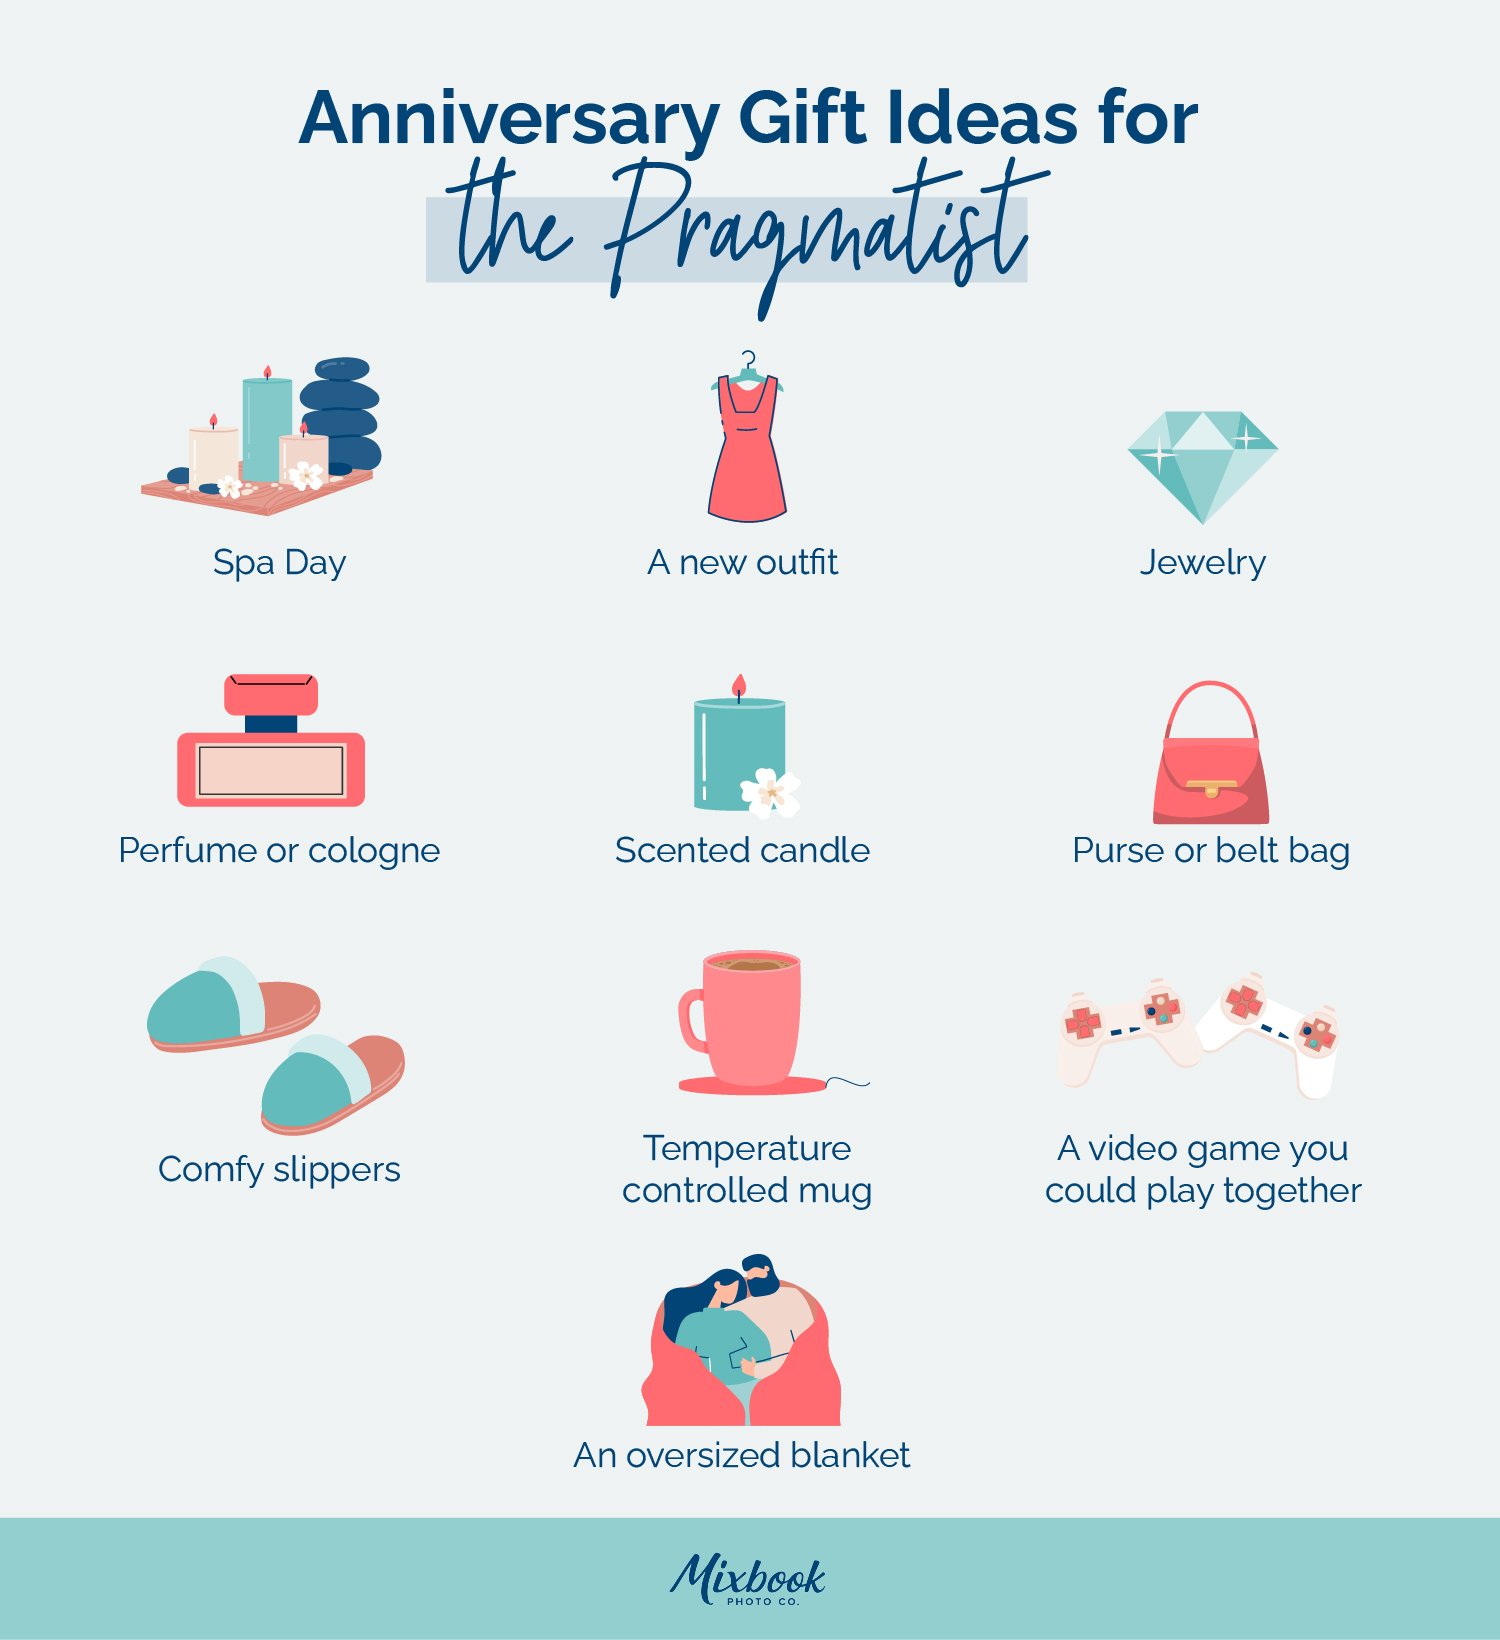 29 5 Year Anniversary Gift Ideas to Reflect on Your Love Journey